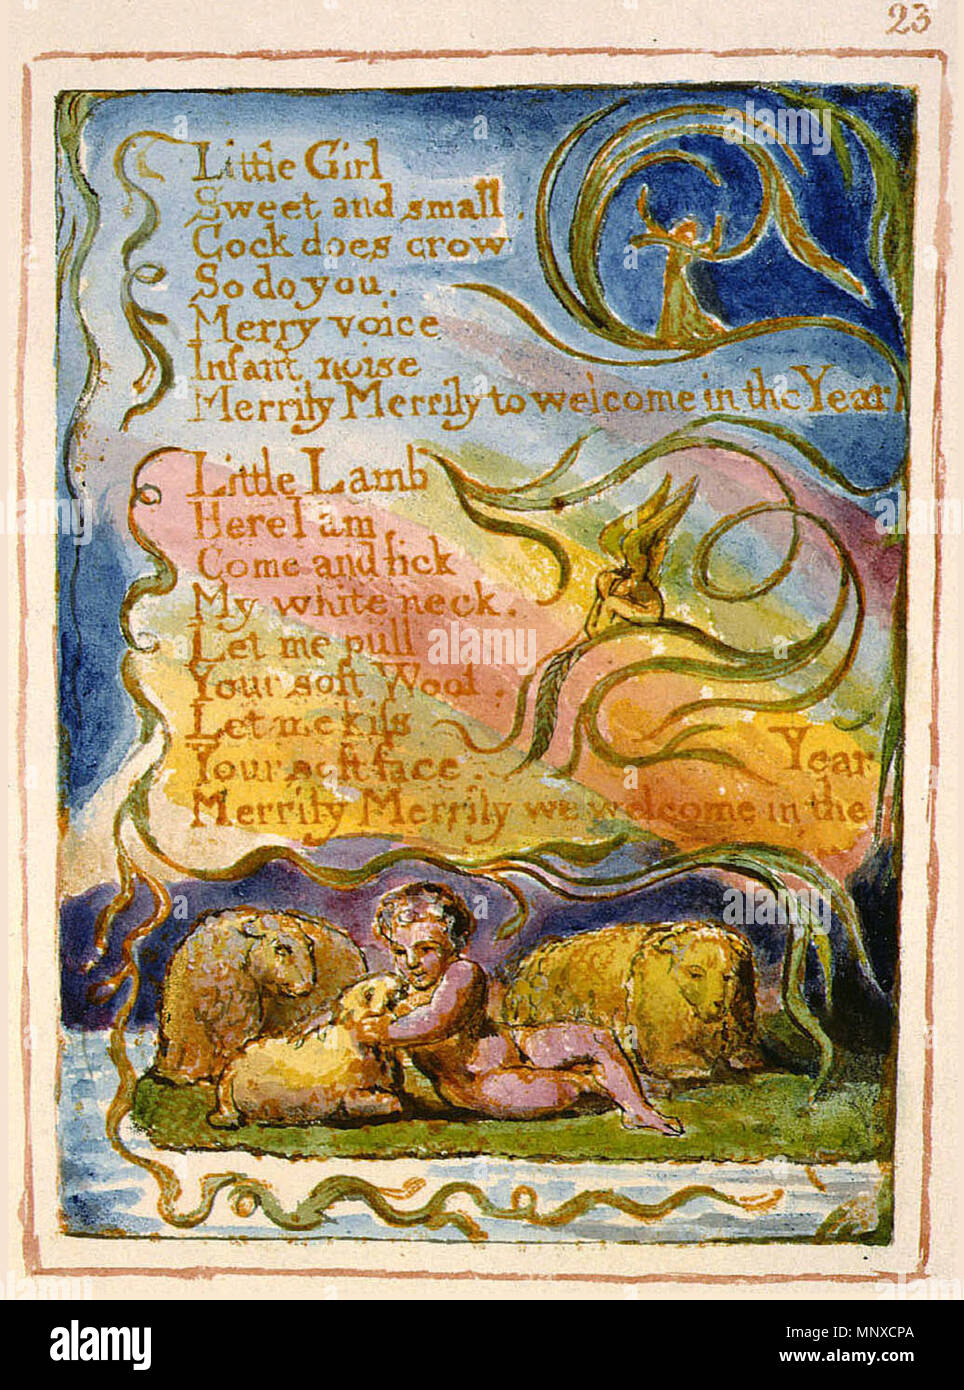 . English: Songs of Innocence and of Experience, copy AA, 1826 (The Fitzwilliam Museum) object 23 Spring . 27 January 2014, 20:18:28.   William Blake  (1757–1827)       Alternative names W. Blake; Uil'iam Bleik  Description British painter, poet, writer, theologian, collector and engraver  Date of birth/death 28 November 1757 12 August 1827  Location of birth/death Broadwick Street Charing Cross  Work location London  Authority control  : Q41513 VIAF: 54144439 ISNI: 0000 0001 2096 135X ULAN: 500012489 LCCN: n78095331 NLA: 35019221 WorldCat    Category:William Blake 1131 Songs of Innocence and  Stock Photo